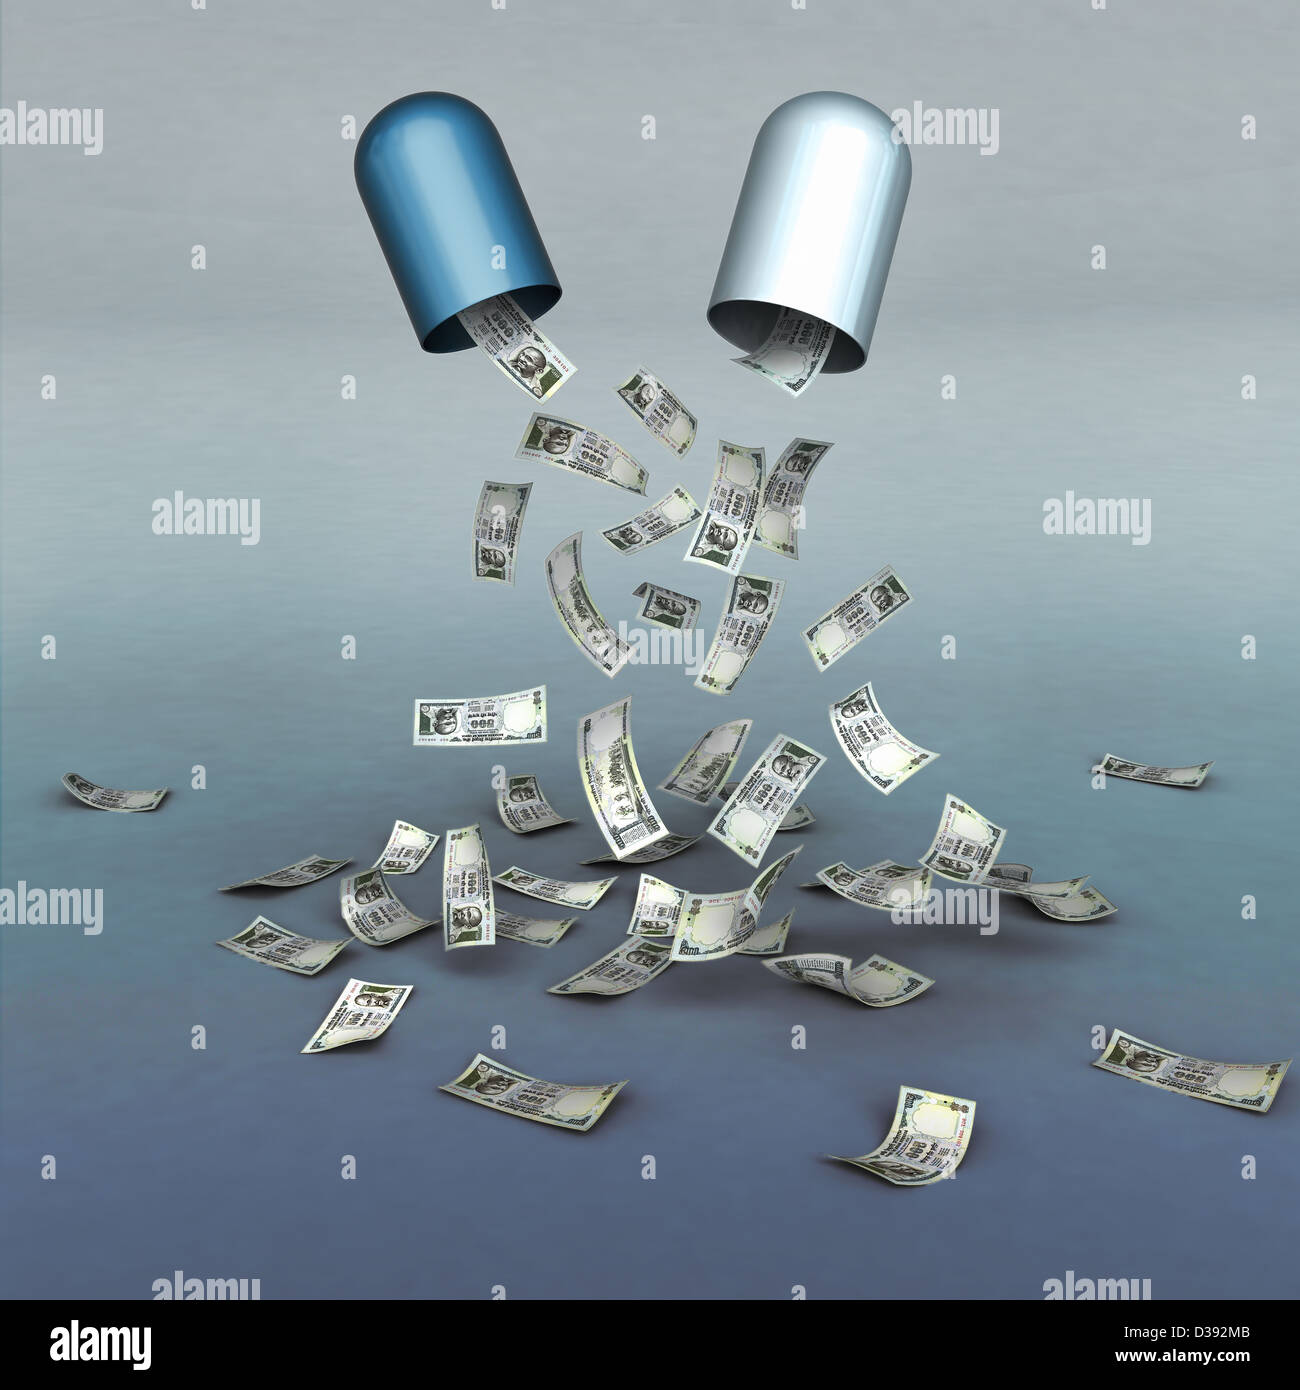 Open drug capsule with contents of money Stock Photo